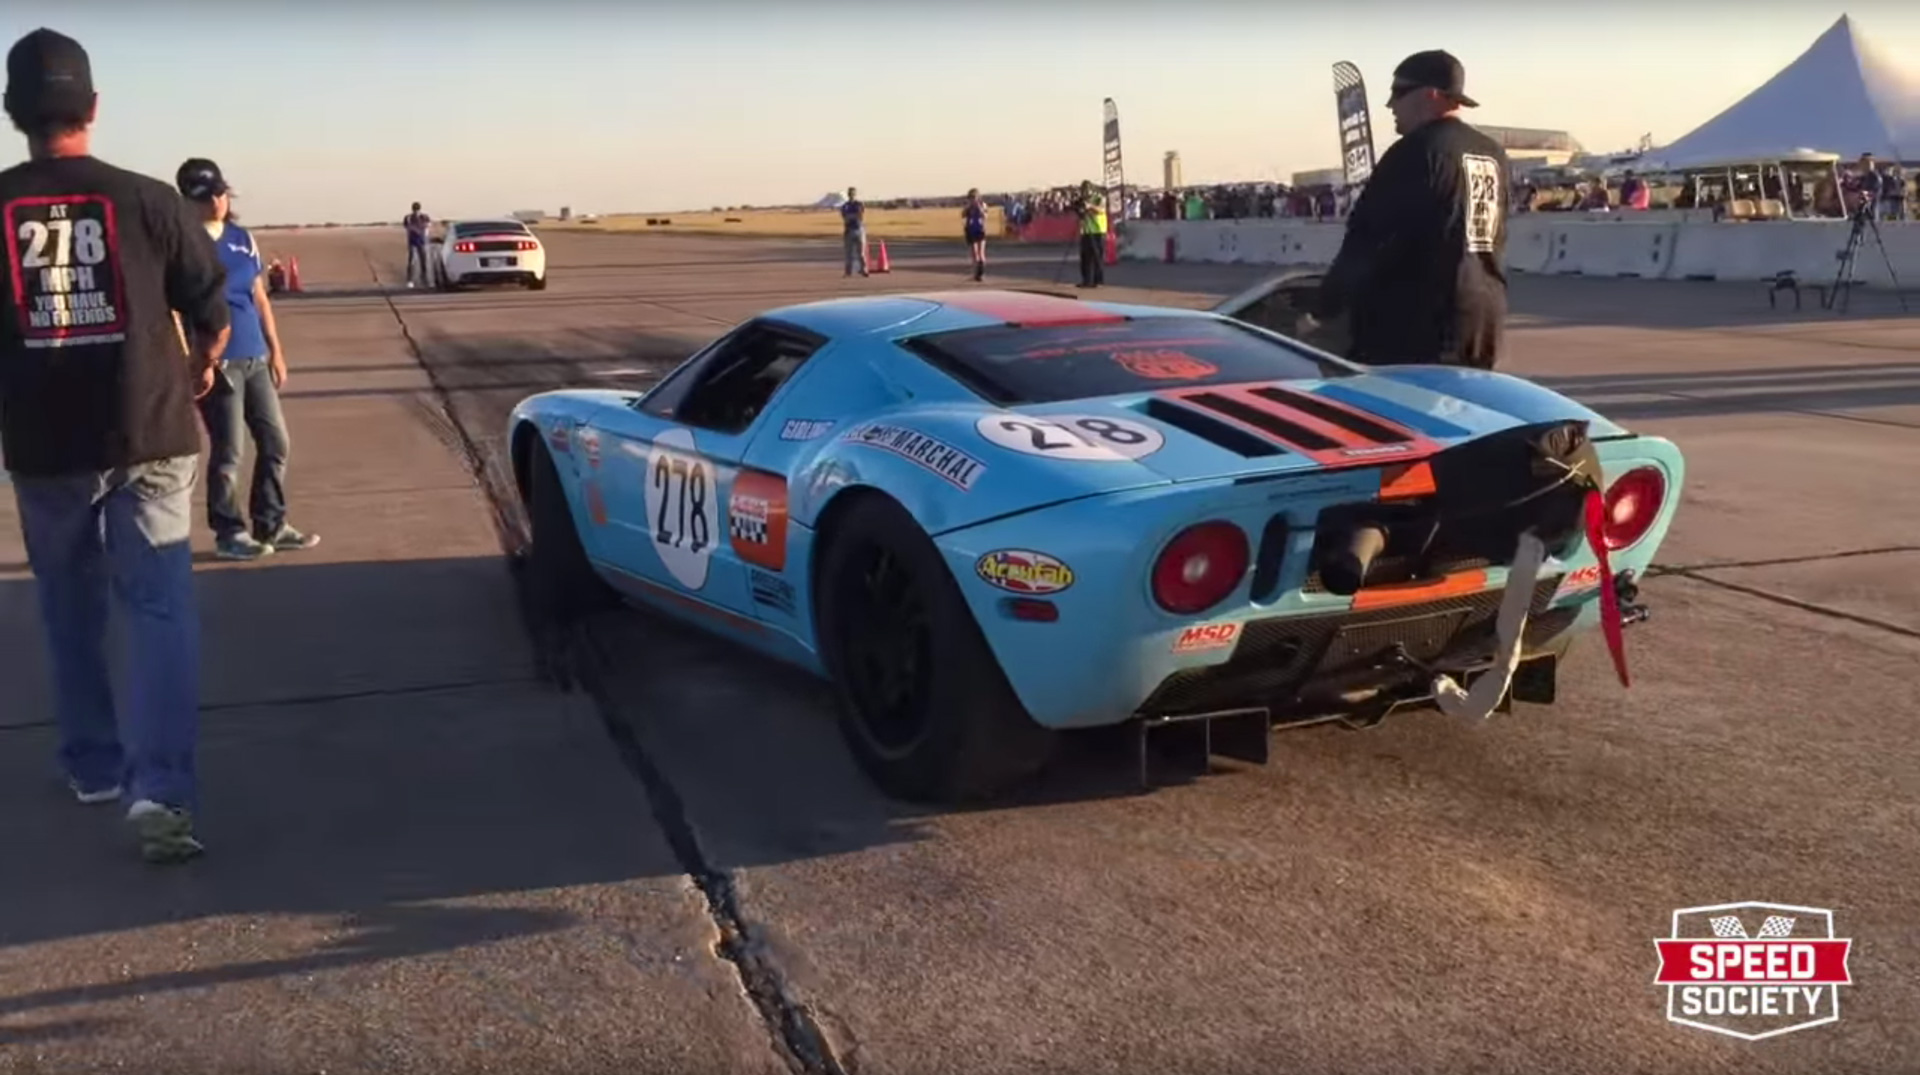 Ford GT Breaks The Texas Mile Record At 279.9 MPH My Life at Speed